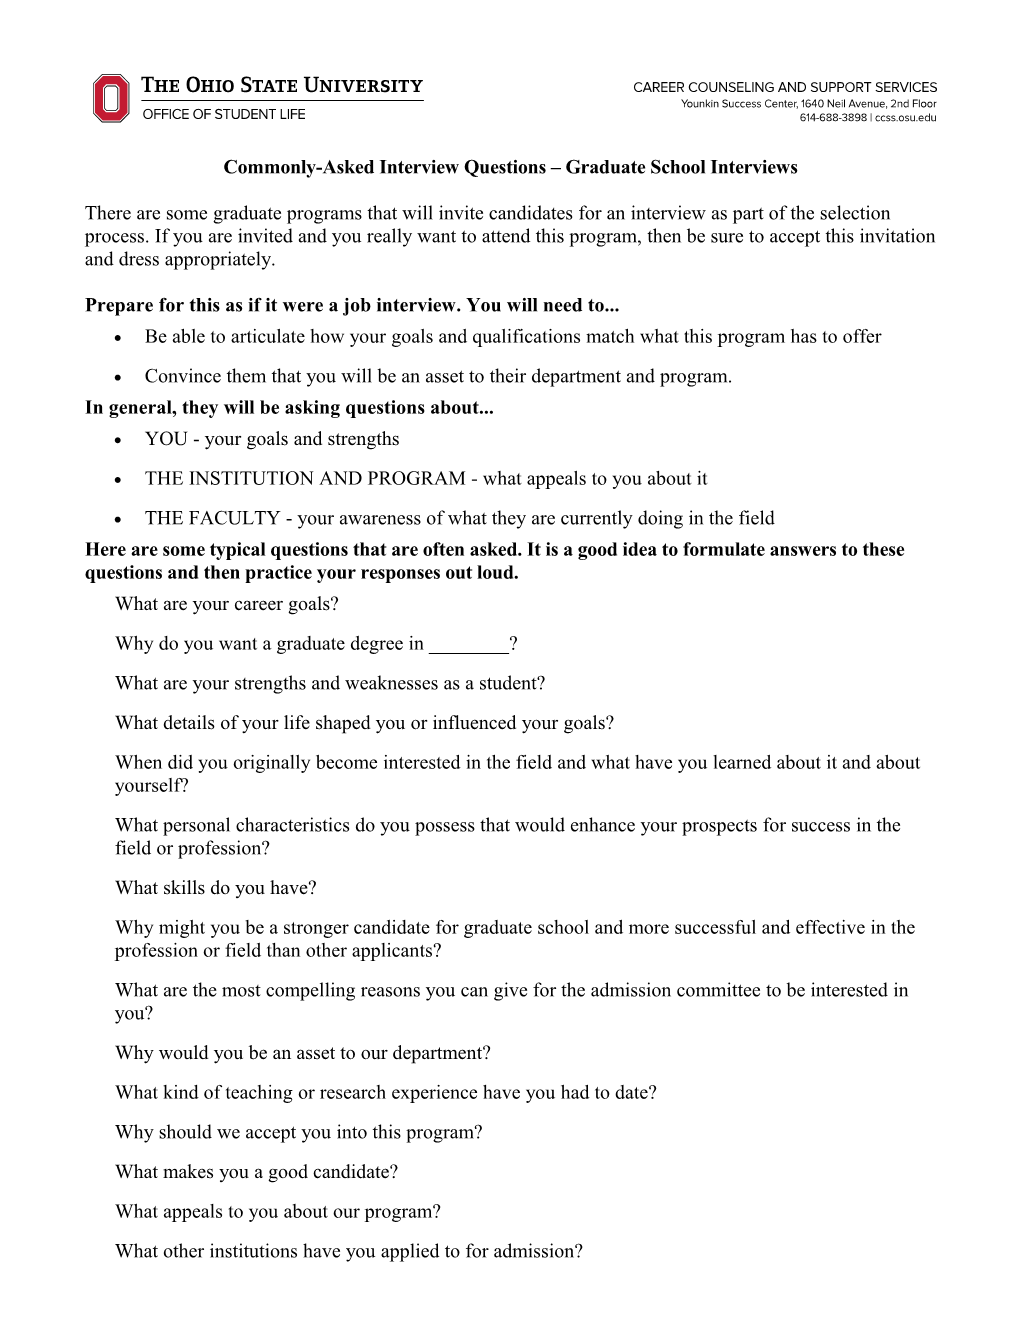 Commonly-Asked Interview Questions Graduate School Interviews